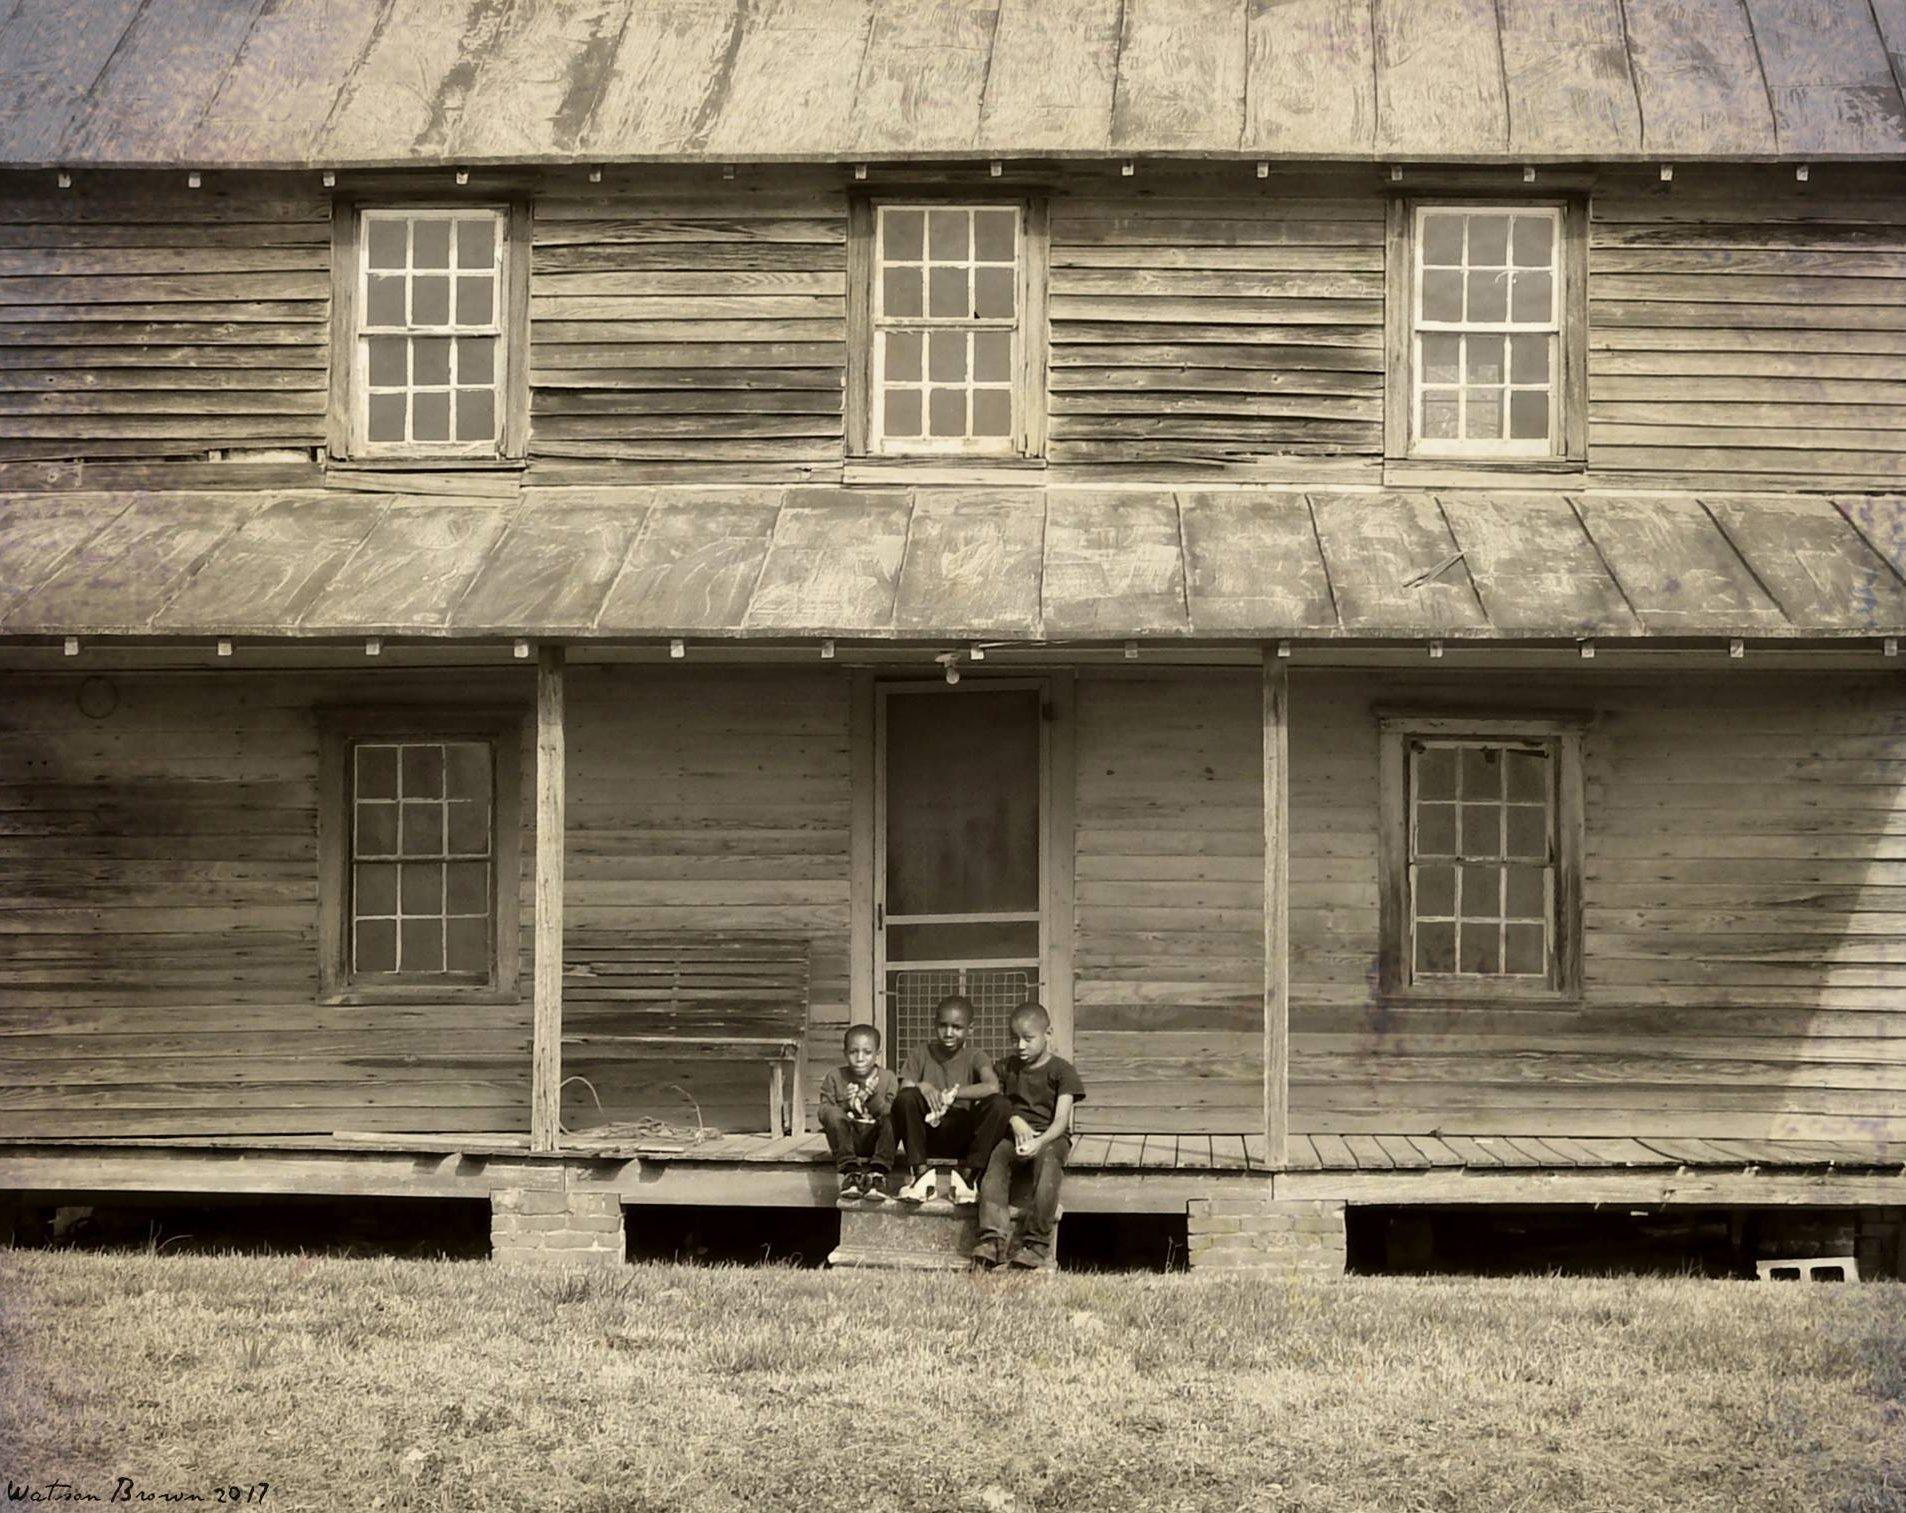 Three young Black boys sit on the edge of the porch of a historic house